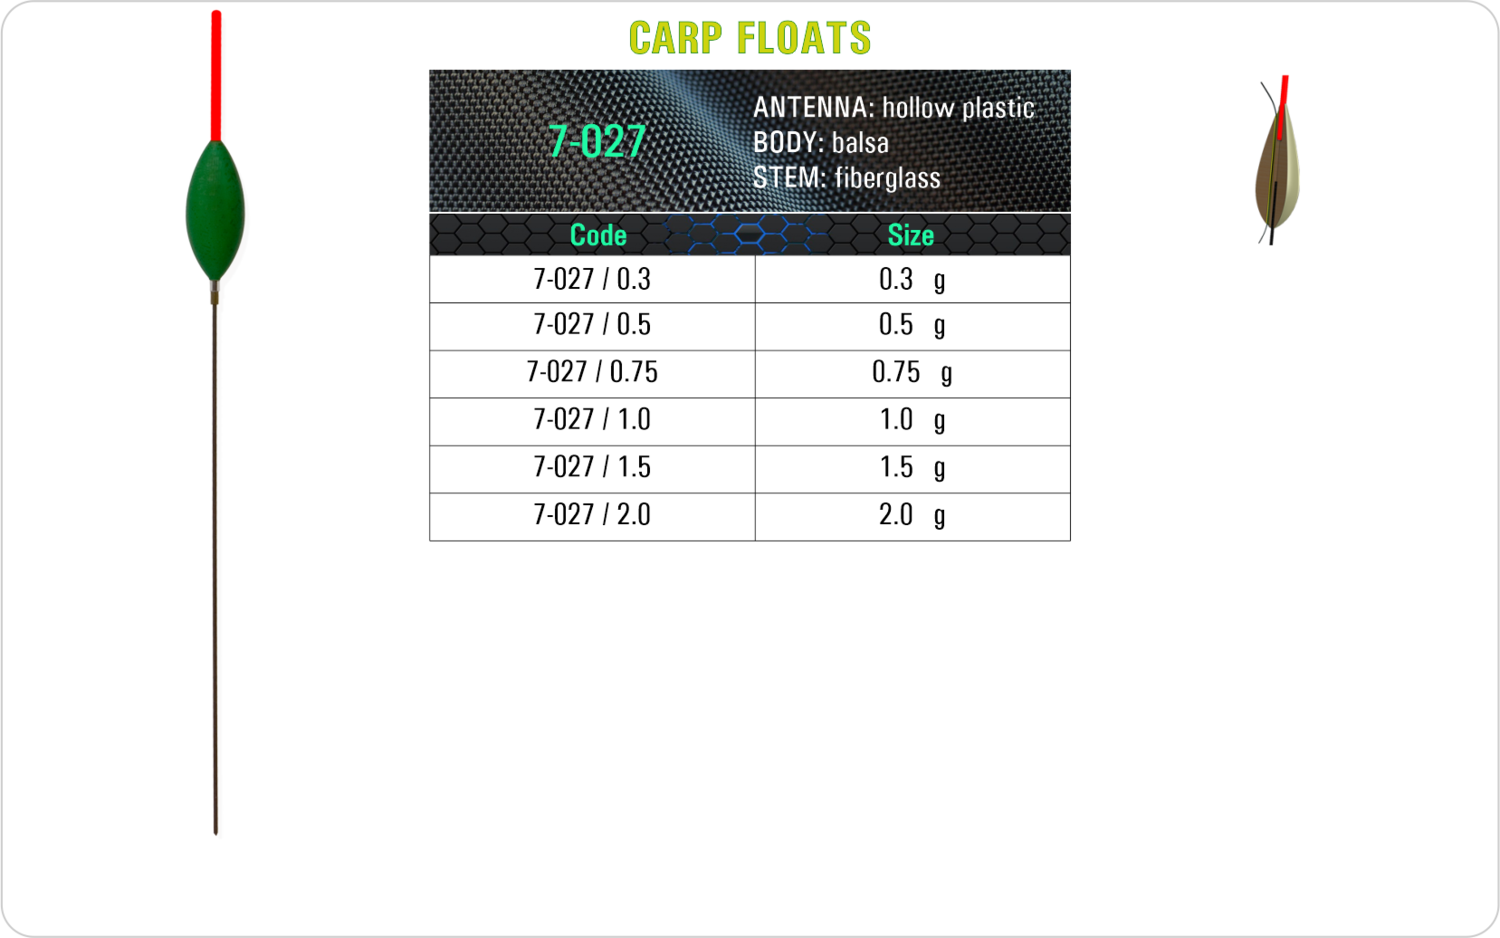 SF 7-027 Carp float model and table containing an additional information about this float with different codes, sizes, types of the body, the stem and the antenna of the float.